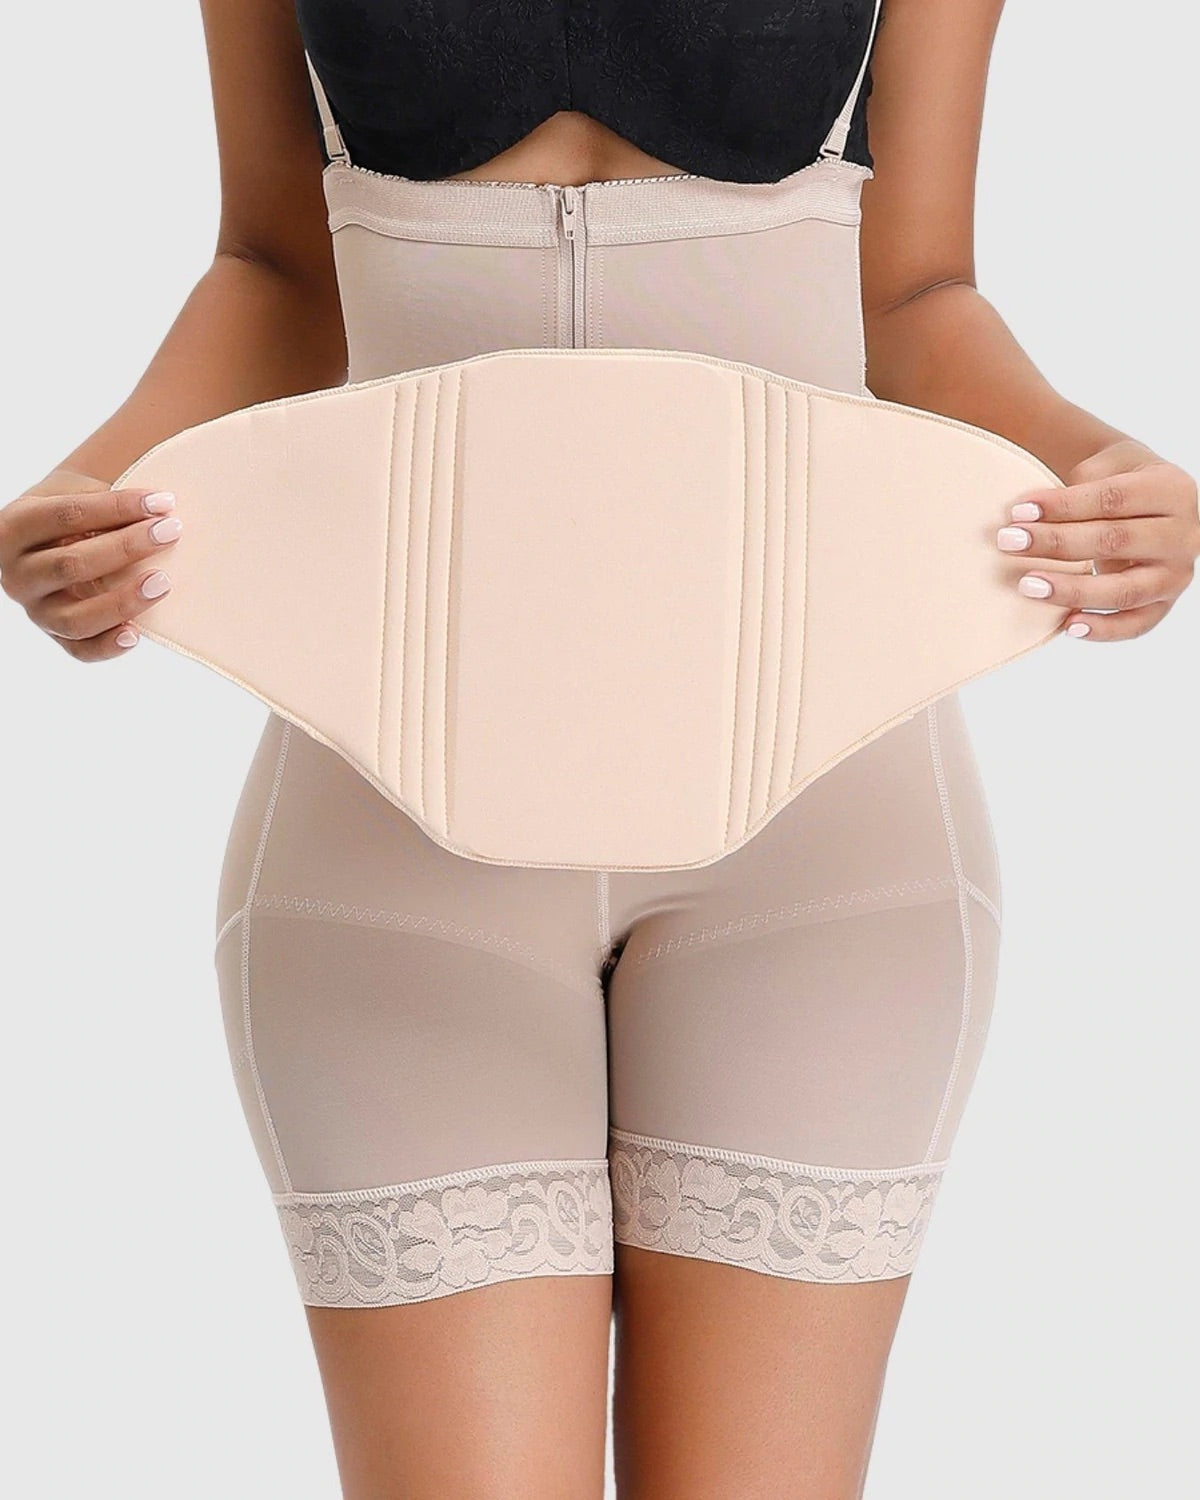 BODY SHAPERS COMPRESSION BOARD - Bodyshapers Lifestyle